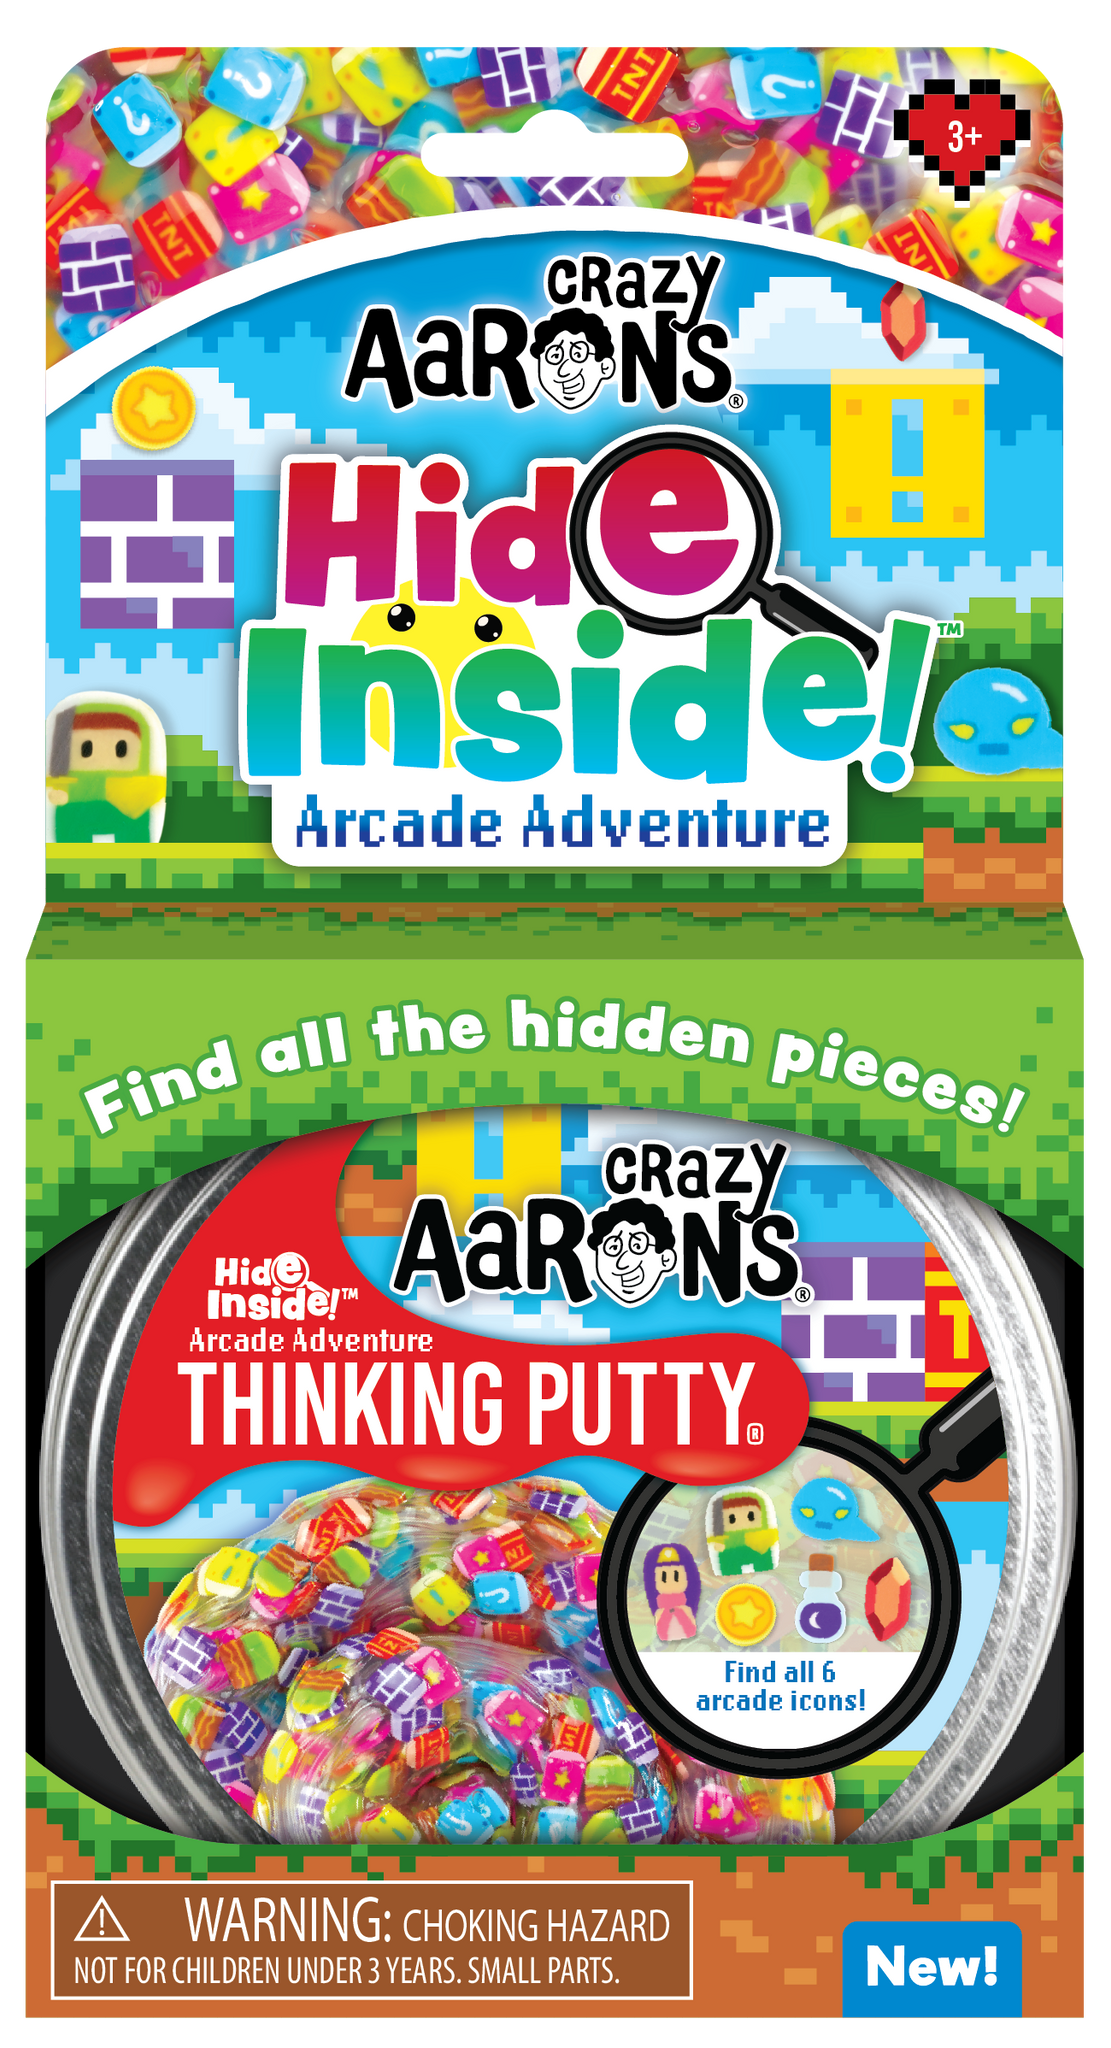 crazy aaron’s thinking putty - hide inside!